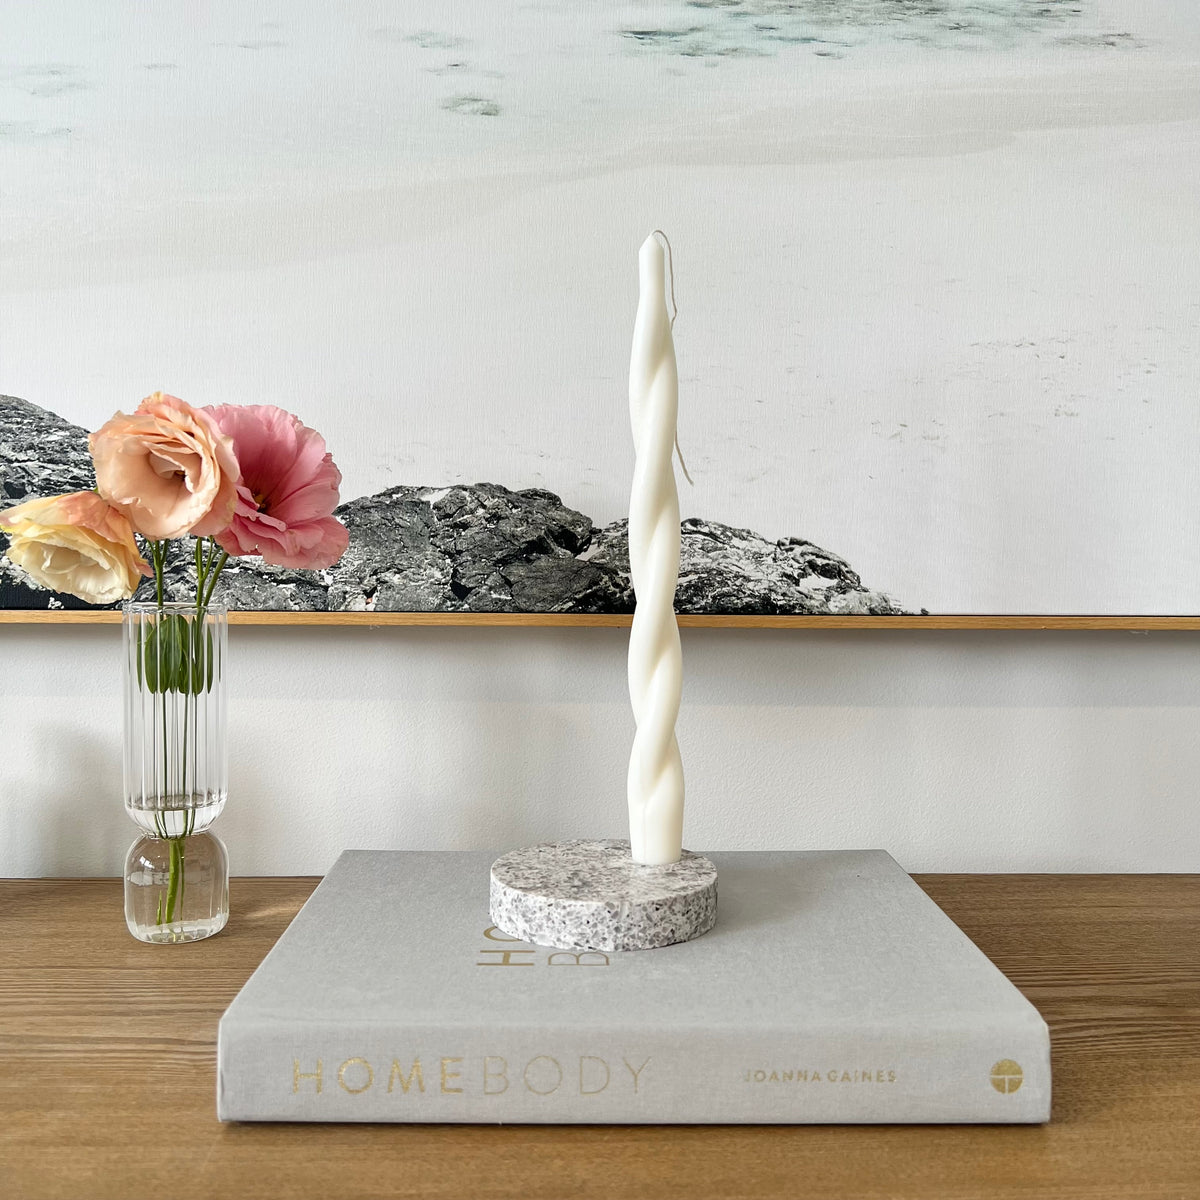 Quartz Round Single Candle Holder in Caesarstone Atlantic Salt created by Aureliia Collection. Styled Studio McKenna Chunky Twist Taper pillar candle and vase with flowers on timber table. This candle holder has a light grey base peppered with whites, browns, and blacks, in a mix that conjures the purity of unrefined sea salts. The perfect home decor item.